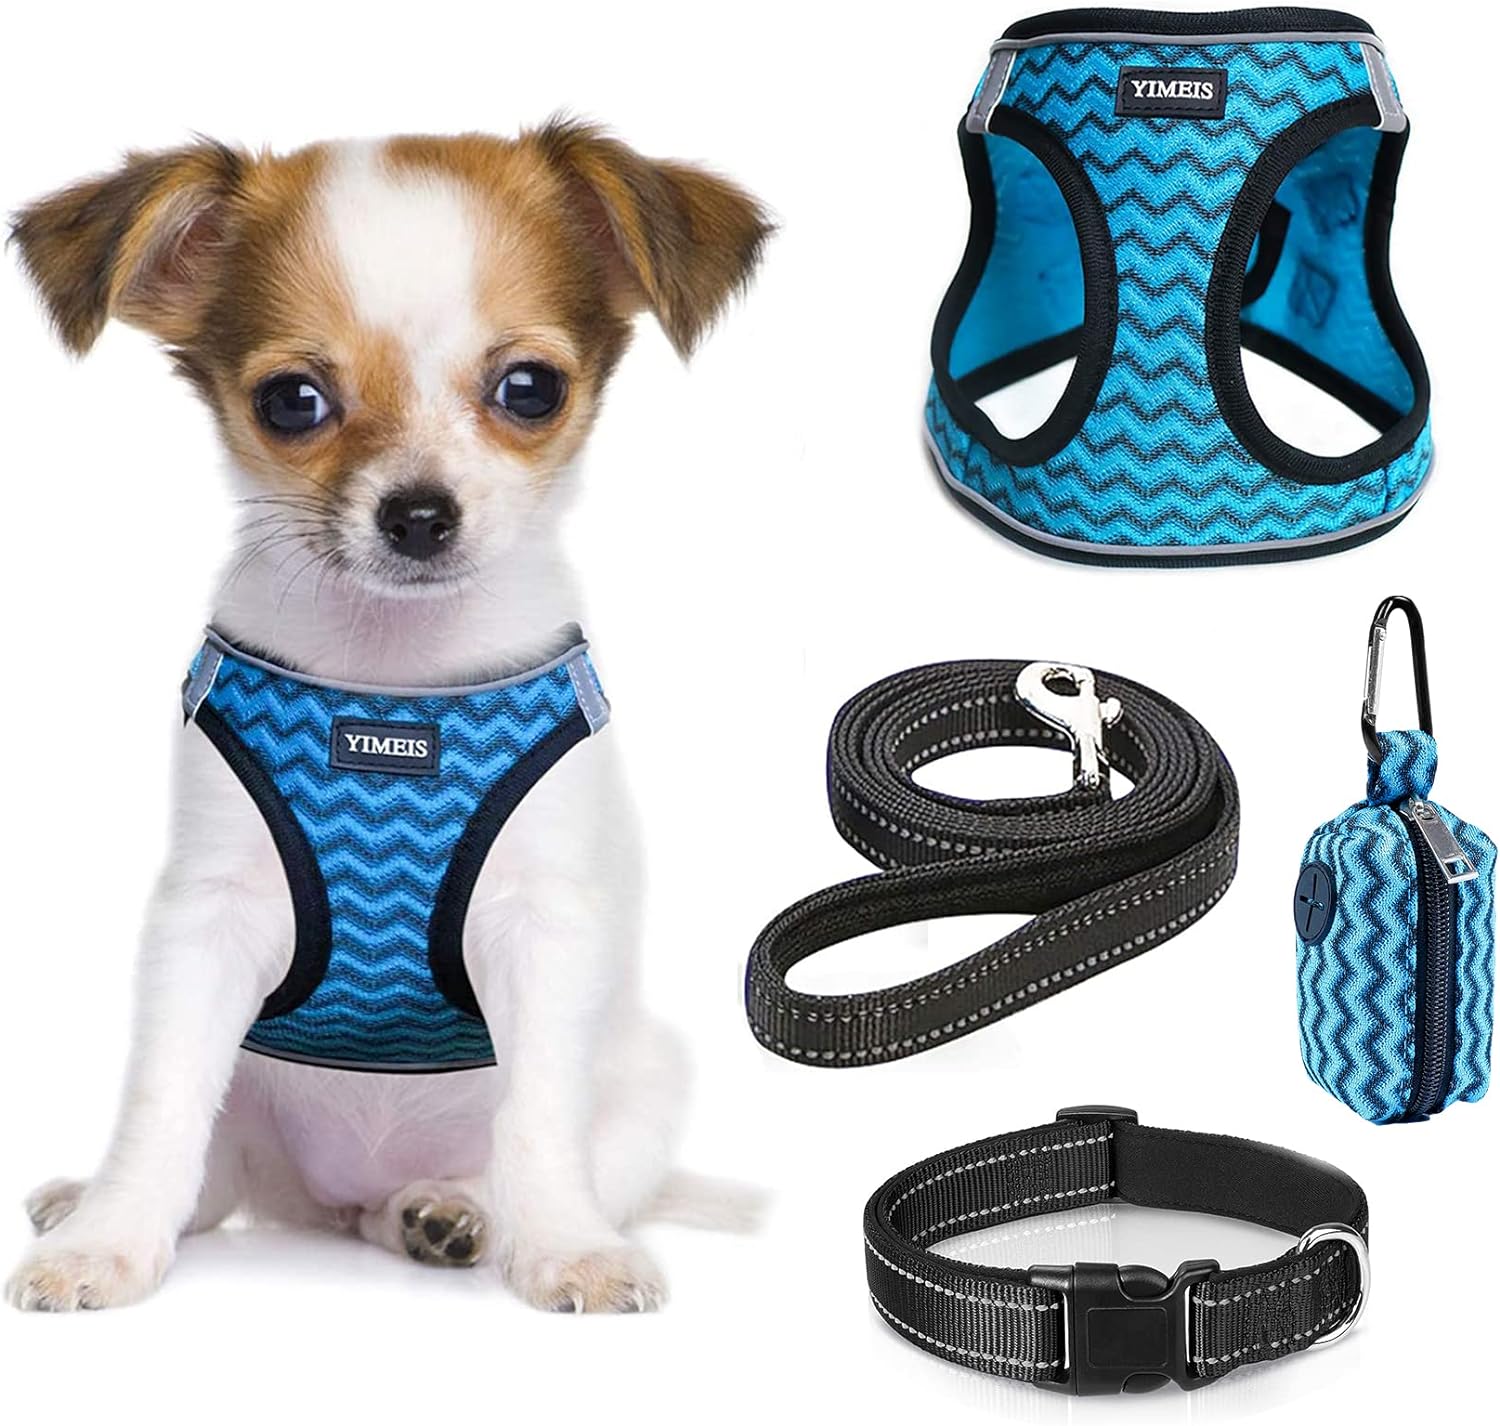 YIMEIS Dog Harness and Leash Set, No Pull Soft Mesh Pet Harness, Reflective Adjustable Puppy Vest for Small Medium Large Dogs, Cats (Blue-Update, Medium (Pack of 1)